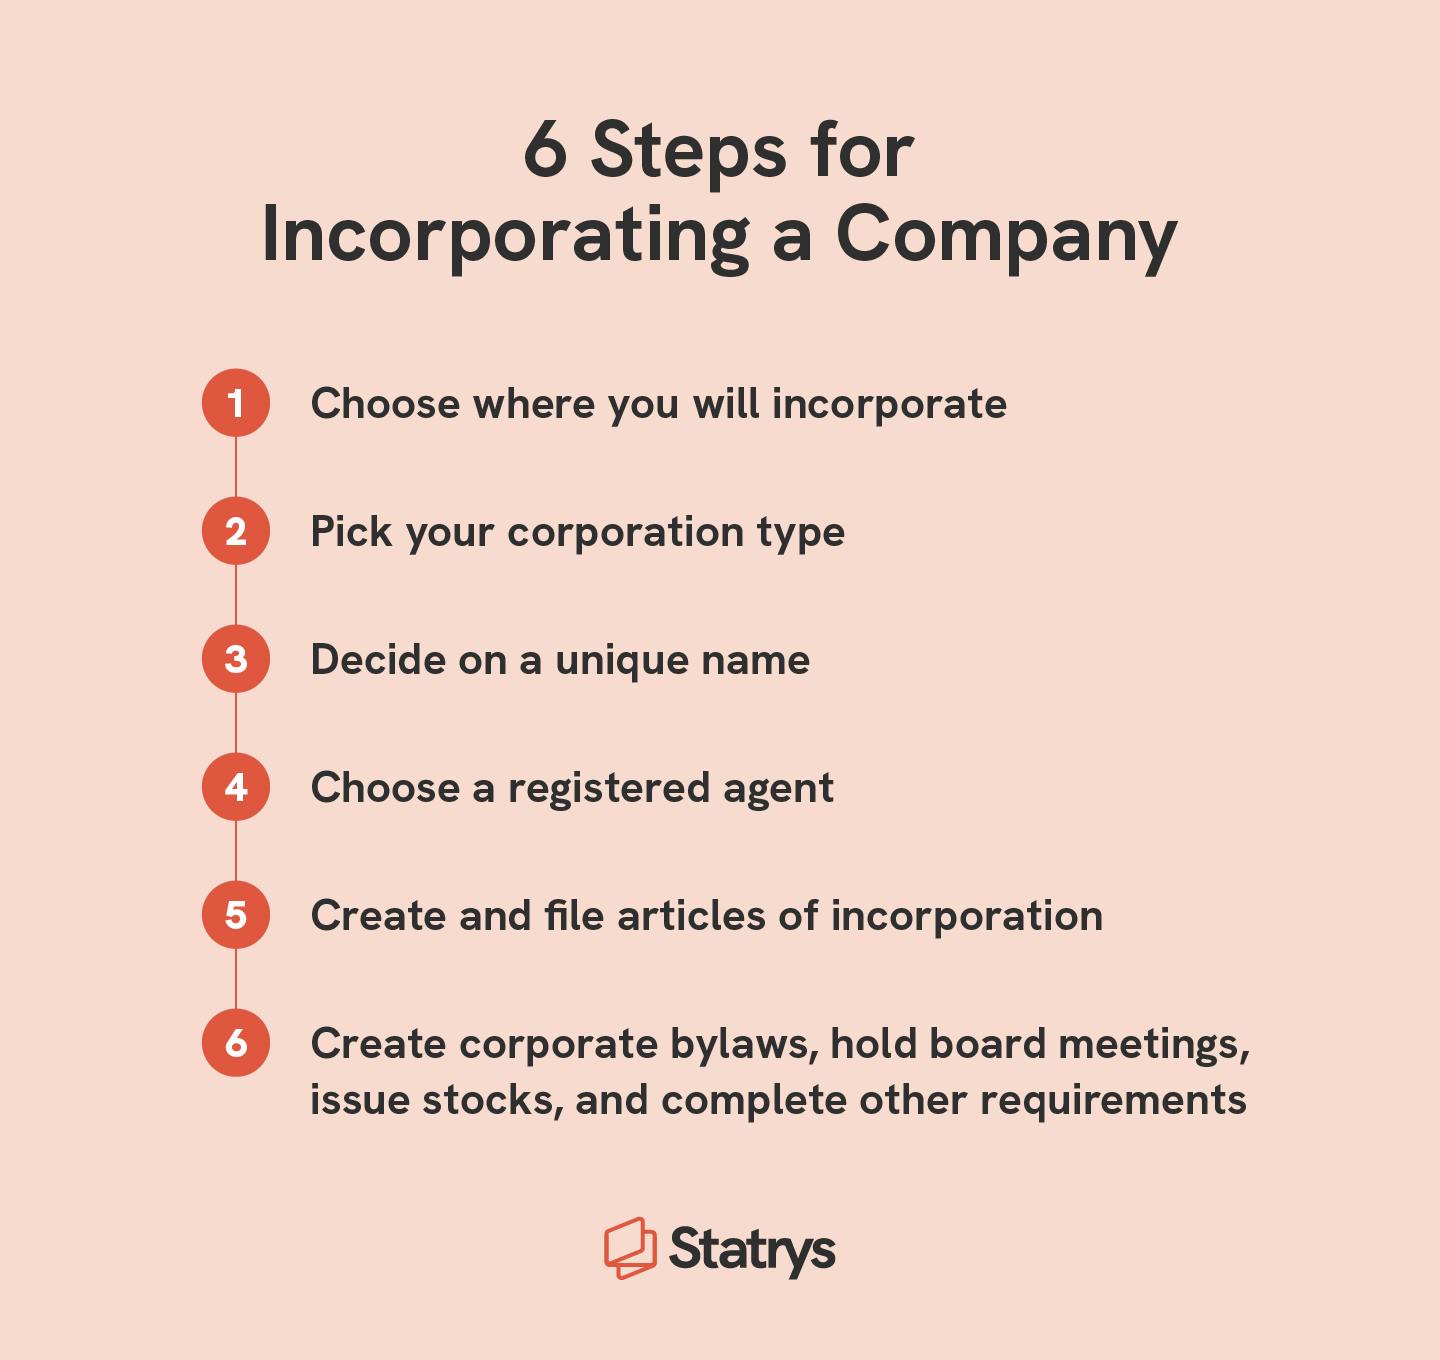 list that includes 6 of the steps necessary to incorporate a business